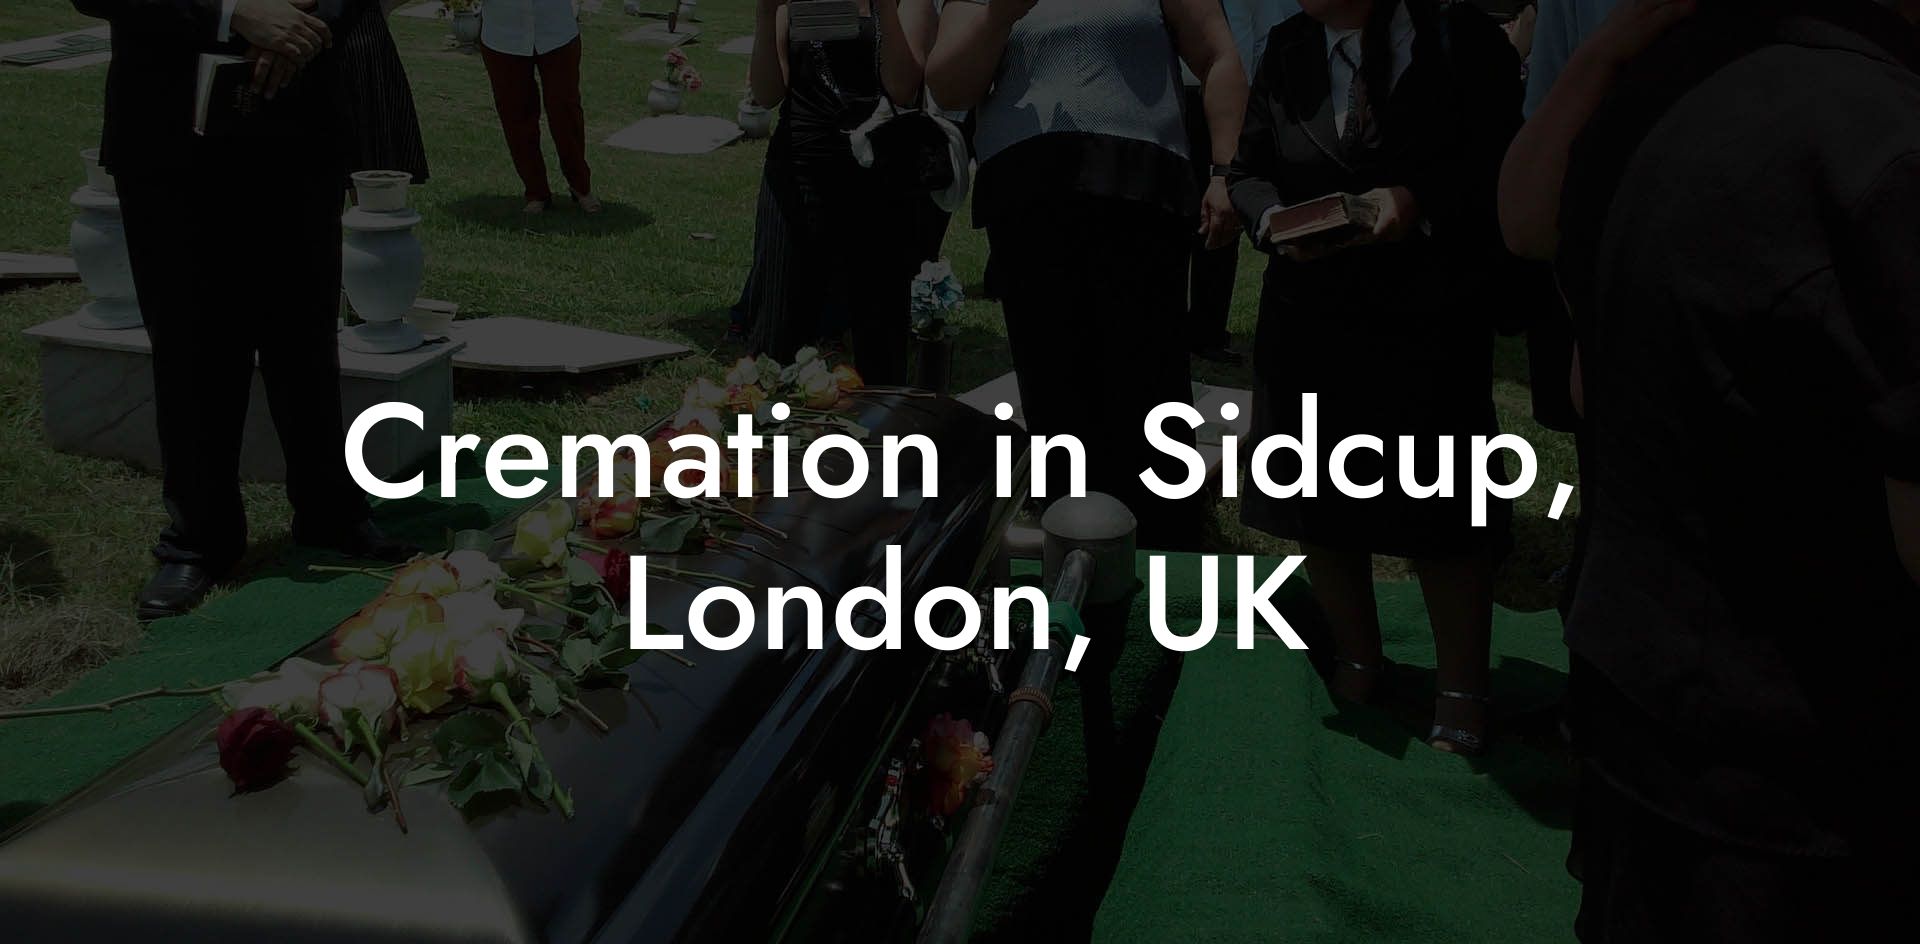 Cremation in Sidcup, London, UK